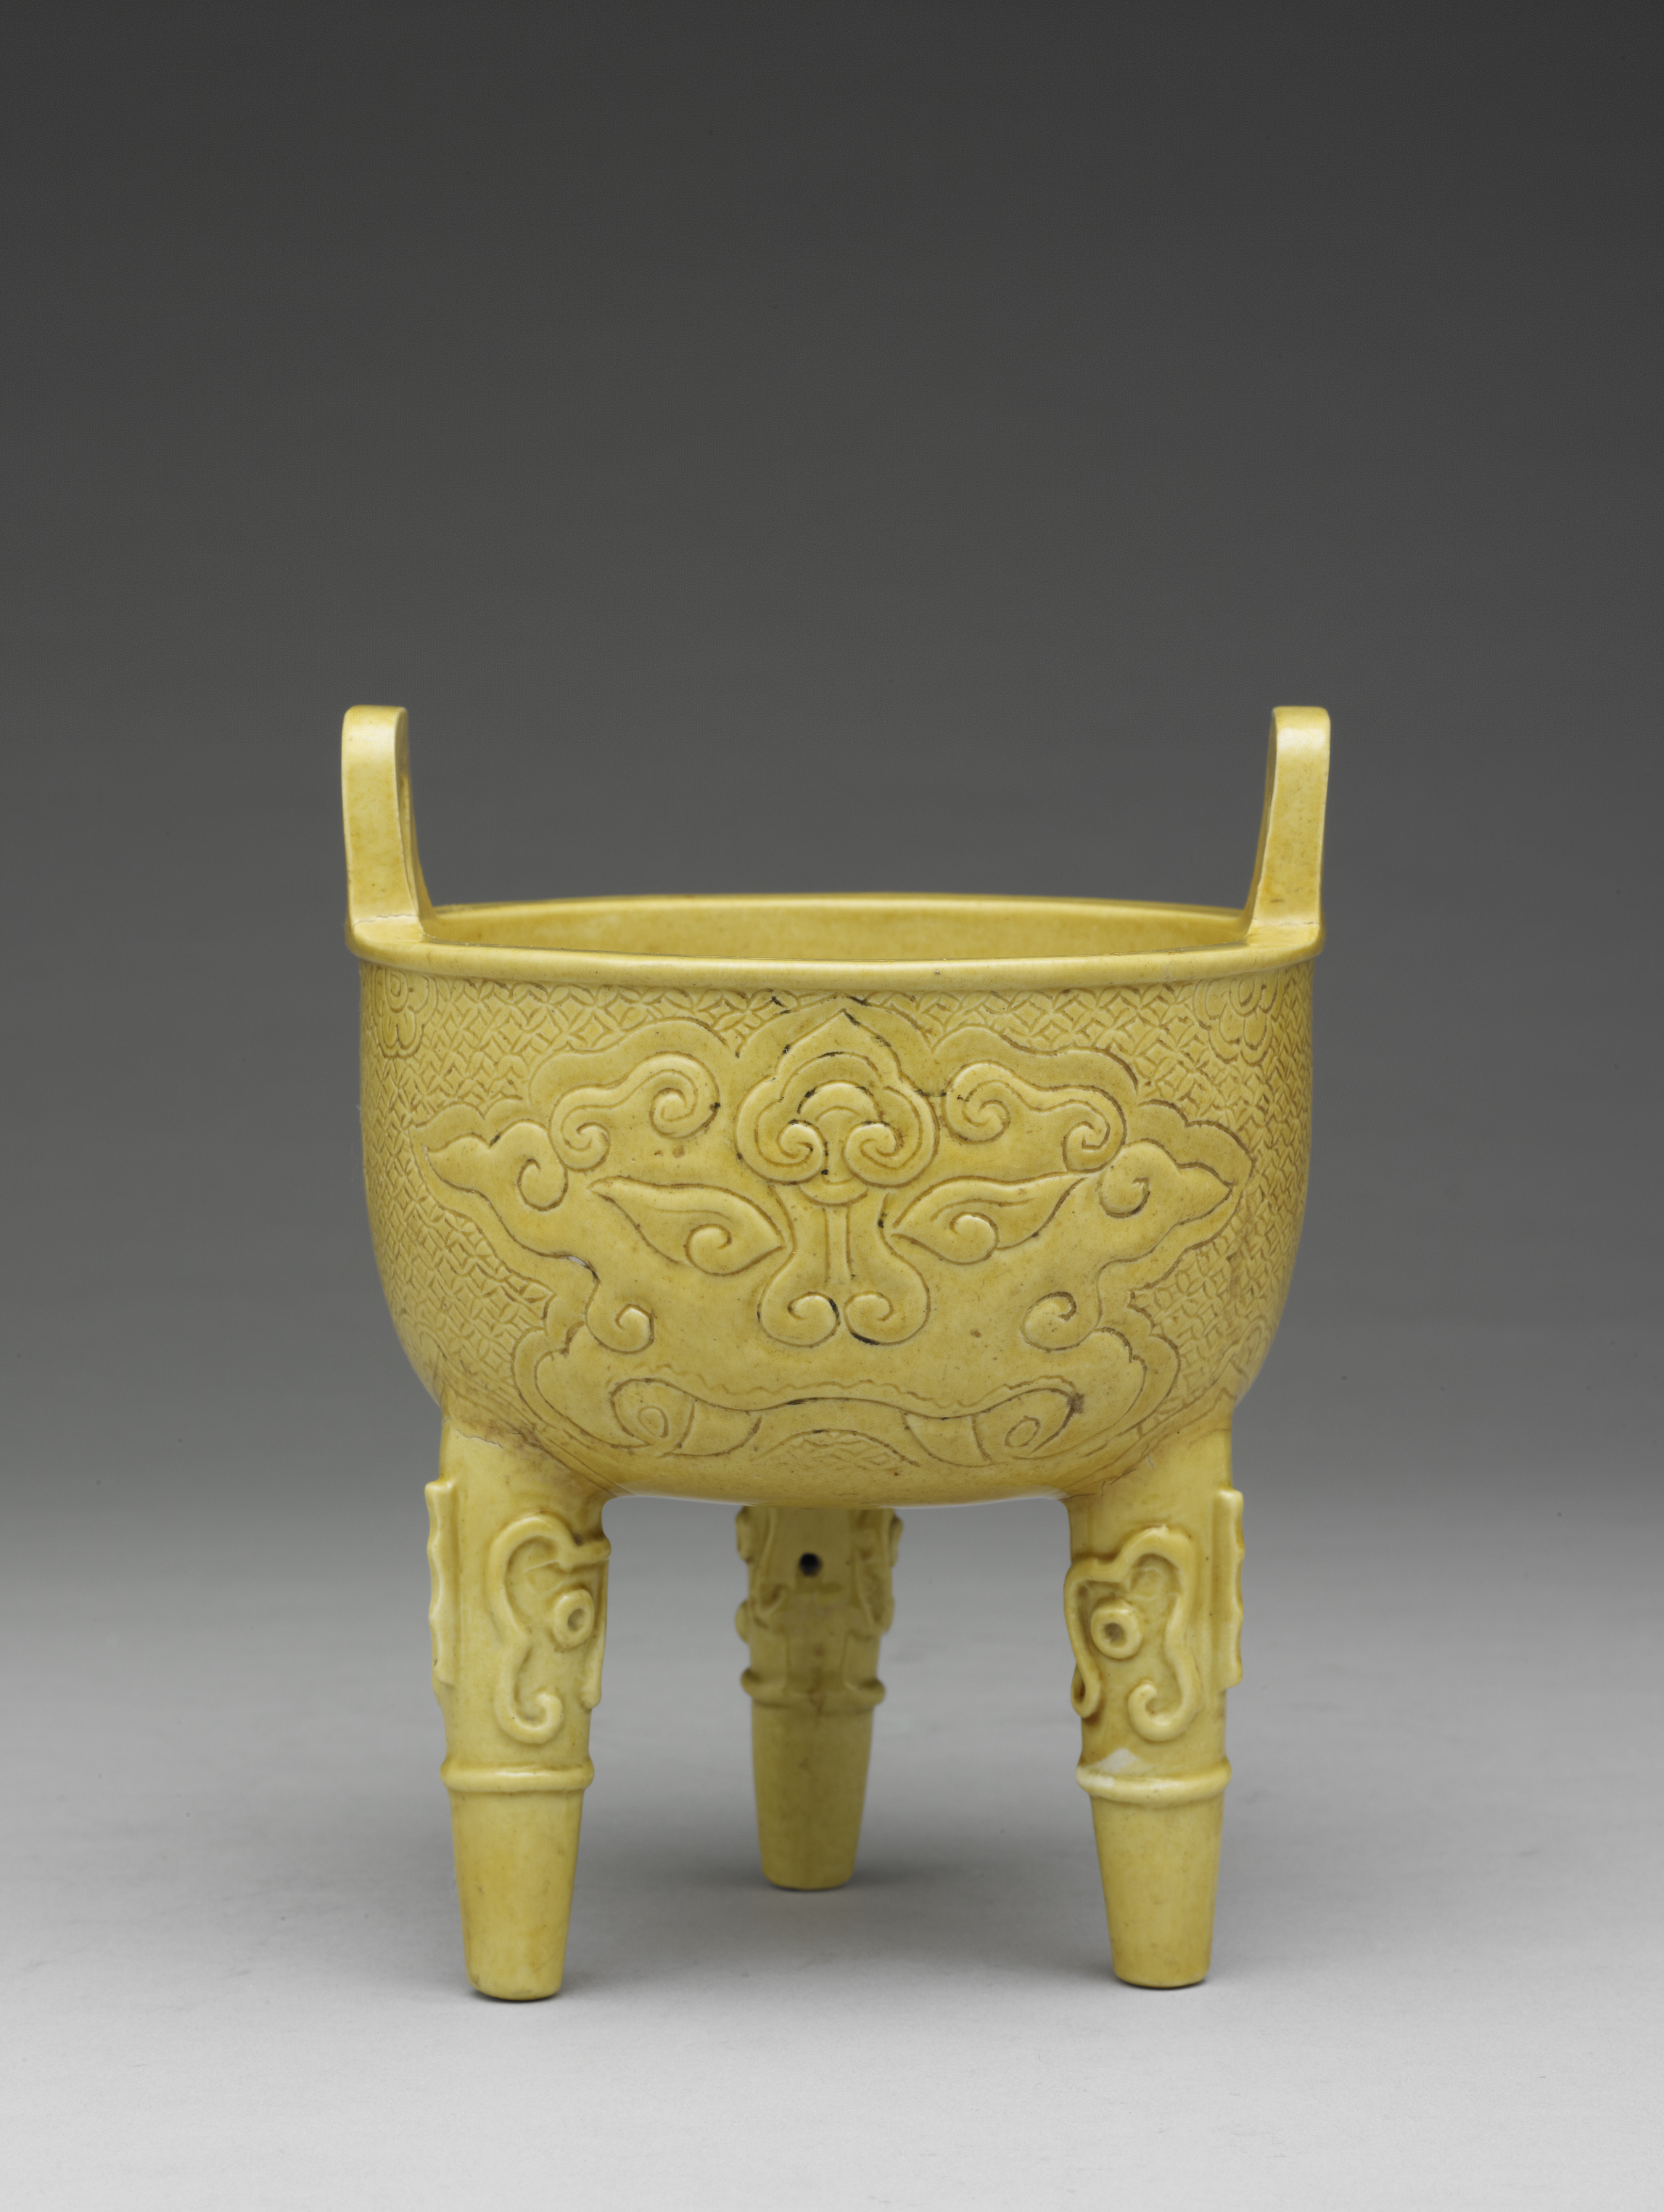 Bright Yellow Ting with Animal-mask Patterns in Relief